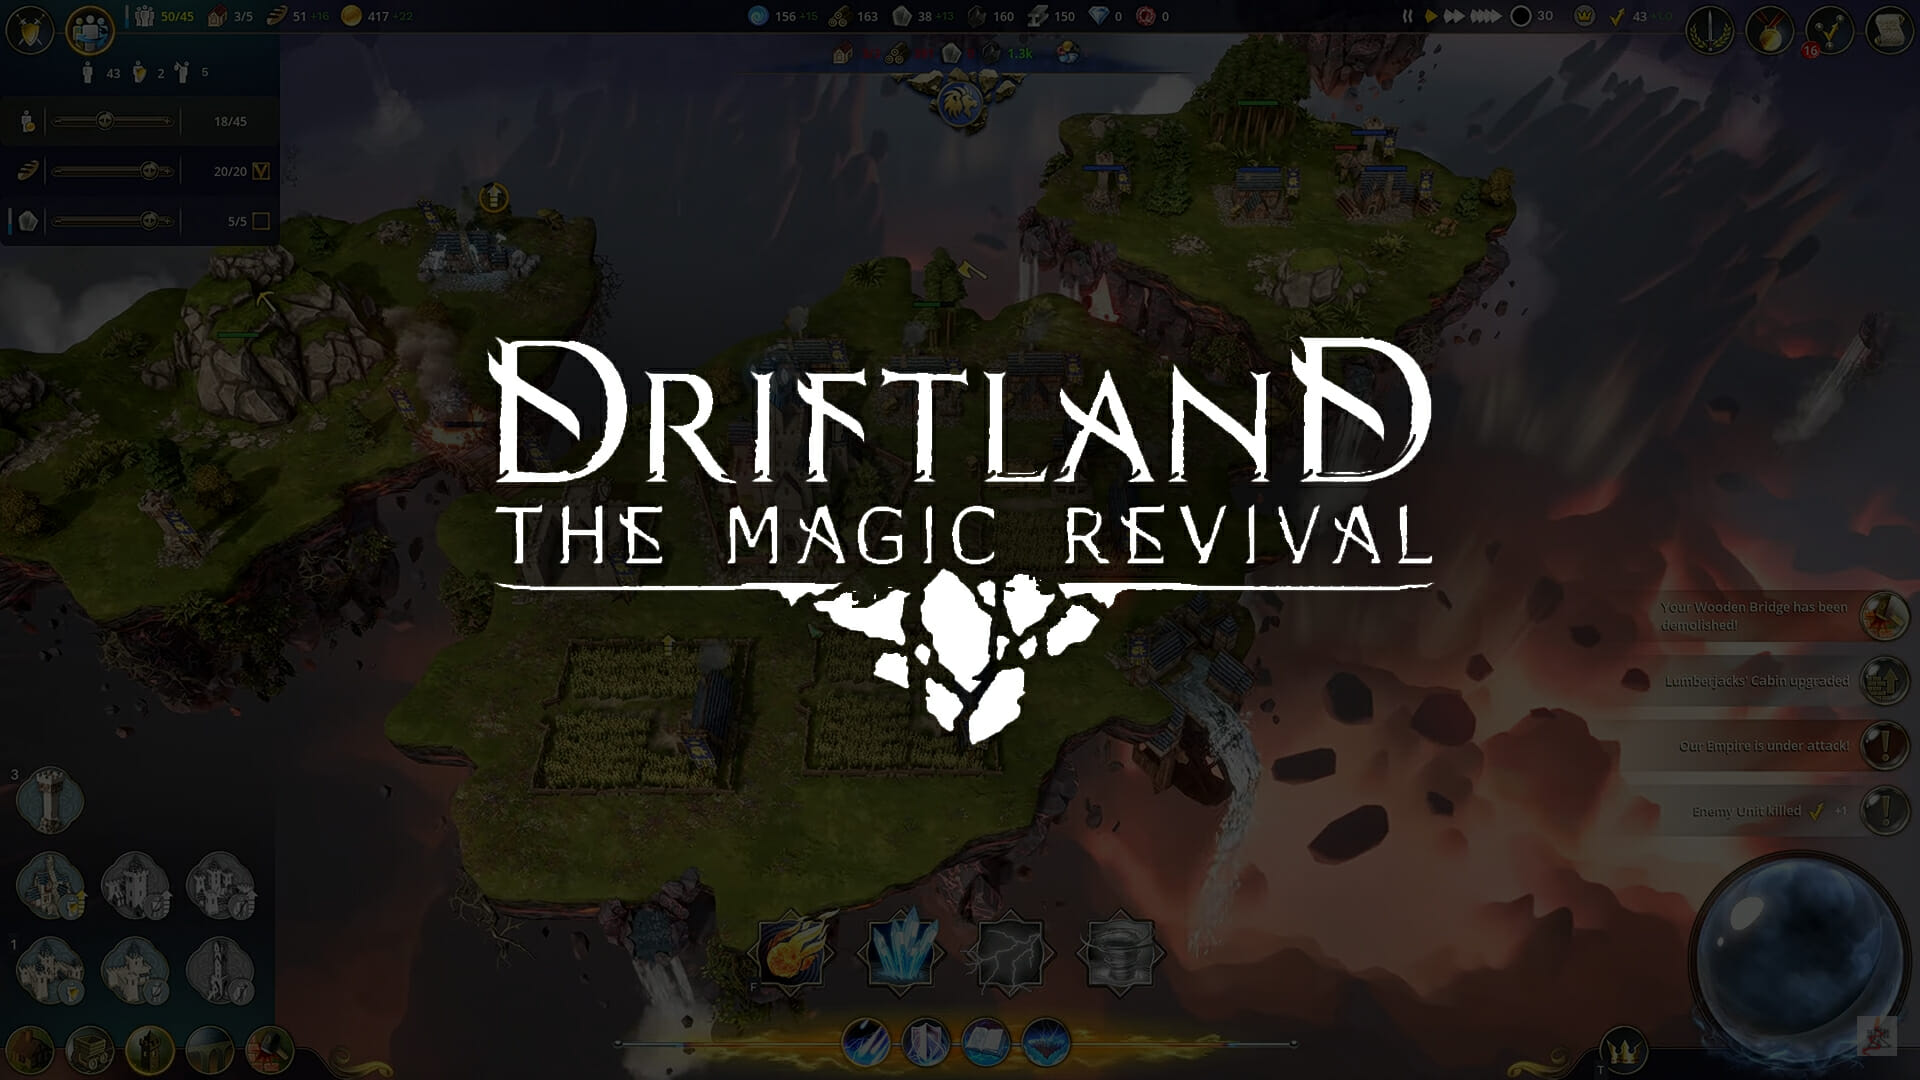 Beating the mold of the classic Majesty series, Driftland The Magic Revival